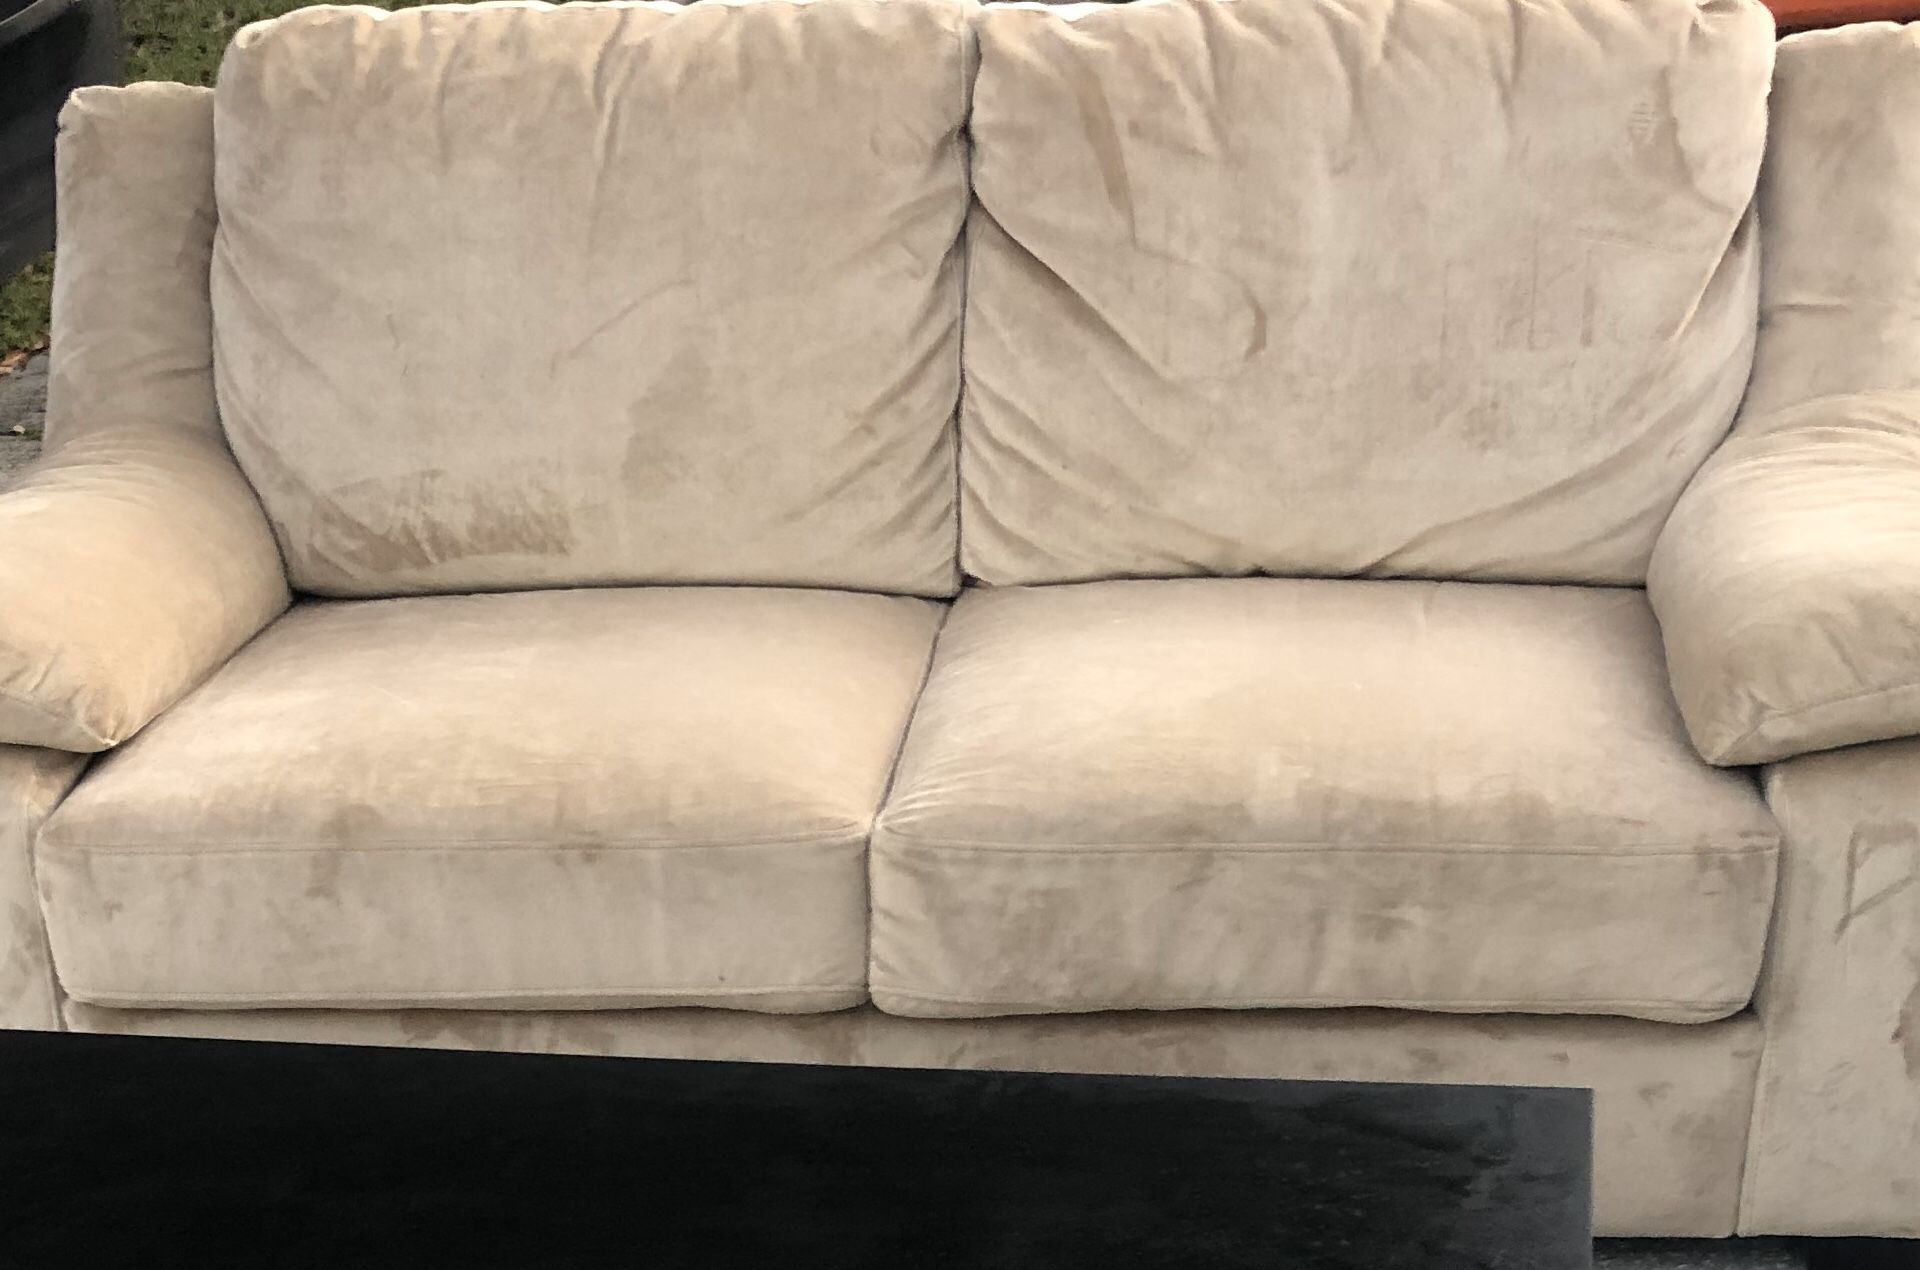 Couch it’s excellent condition